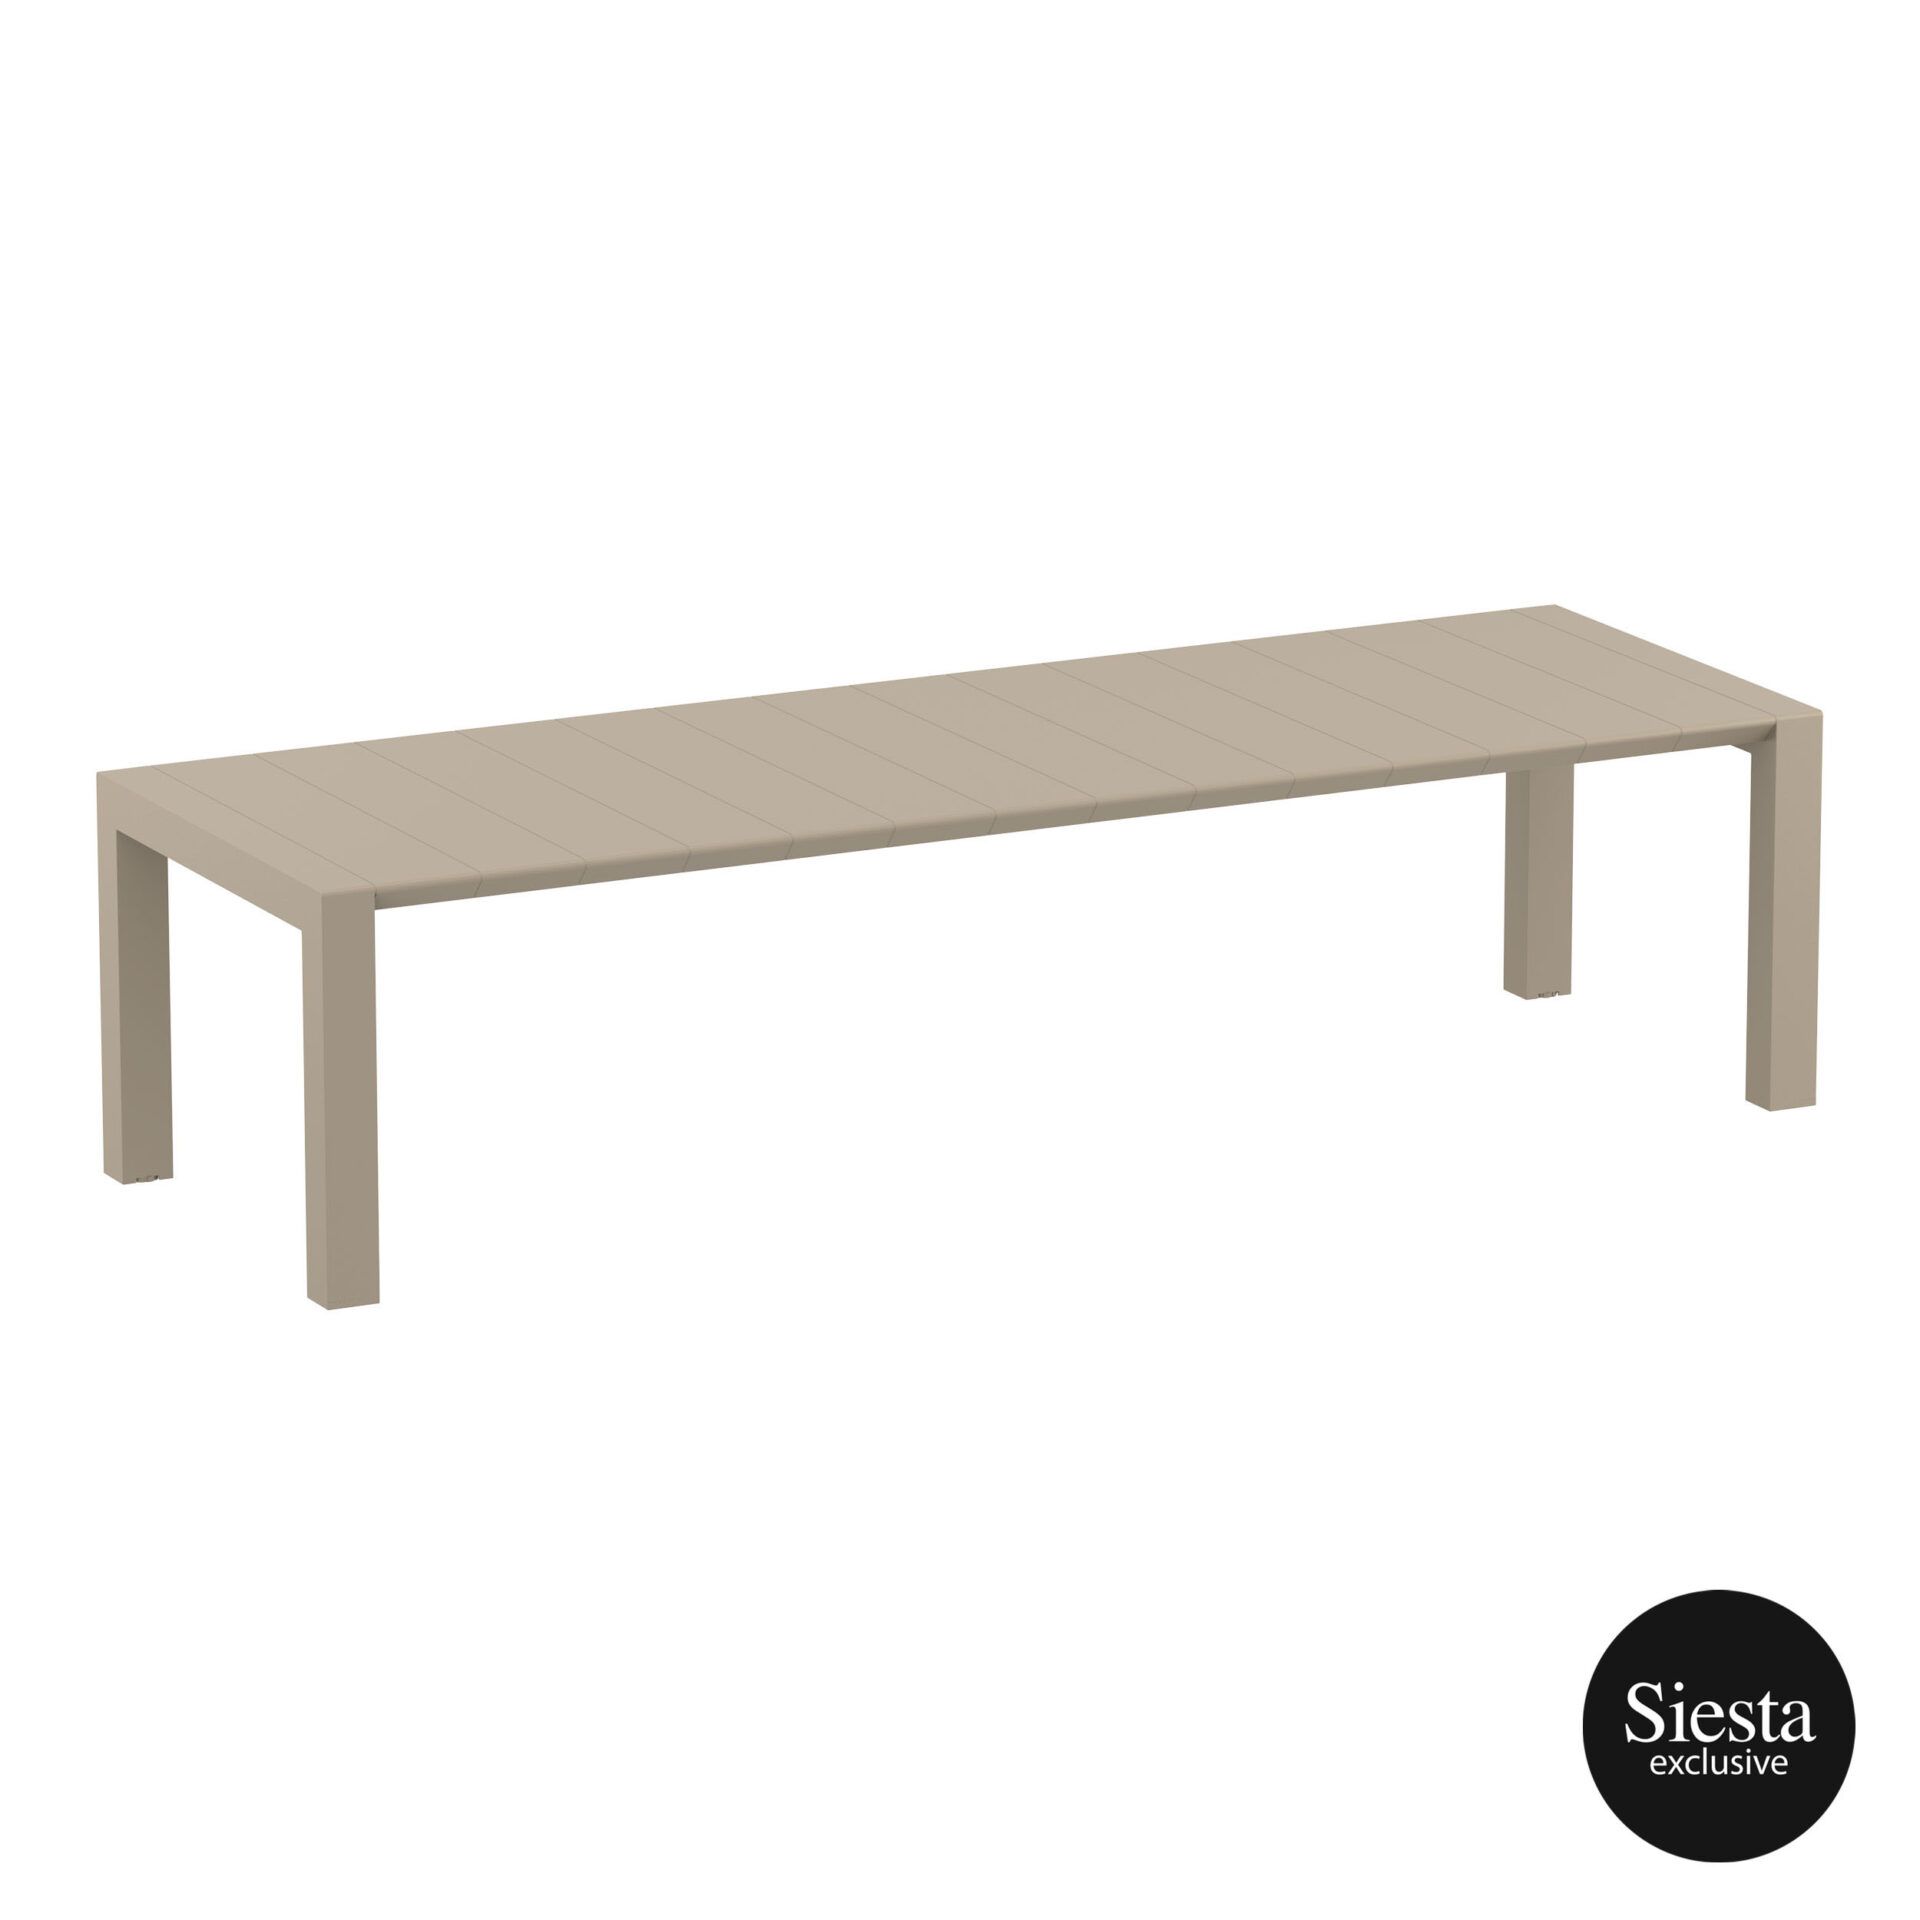 010 vegas table xl 300 taupe front side 1